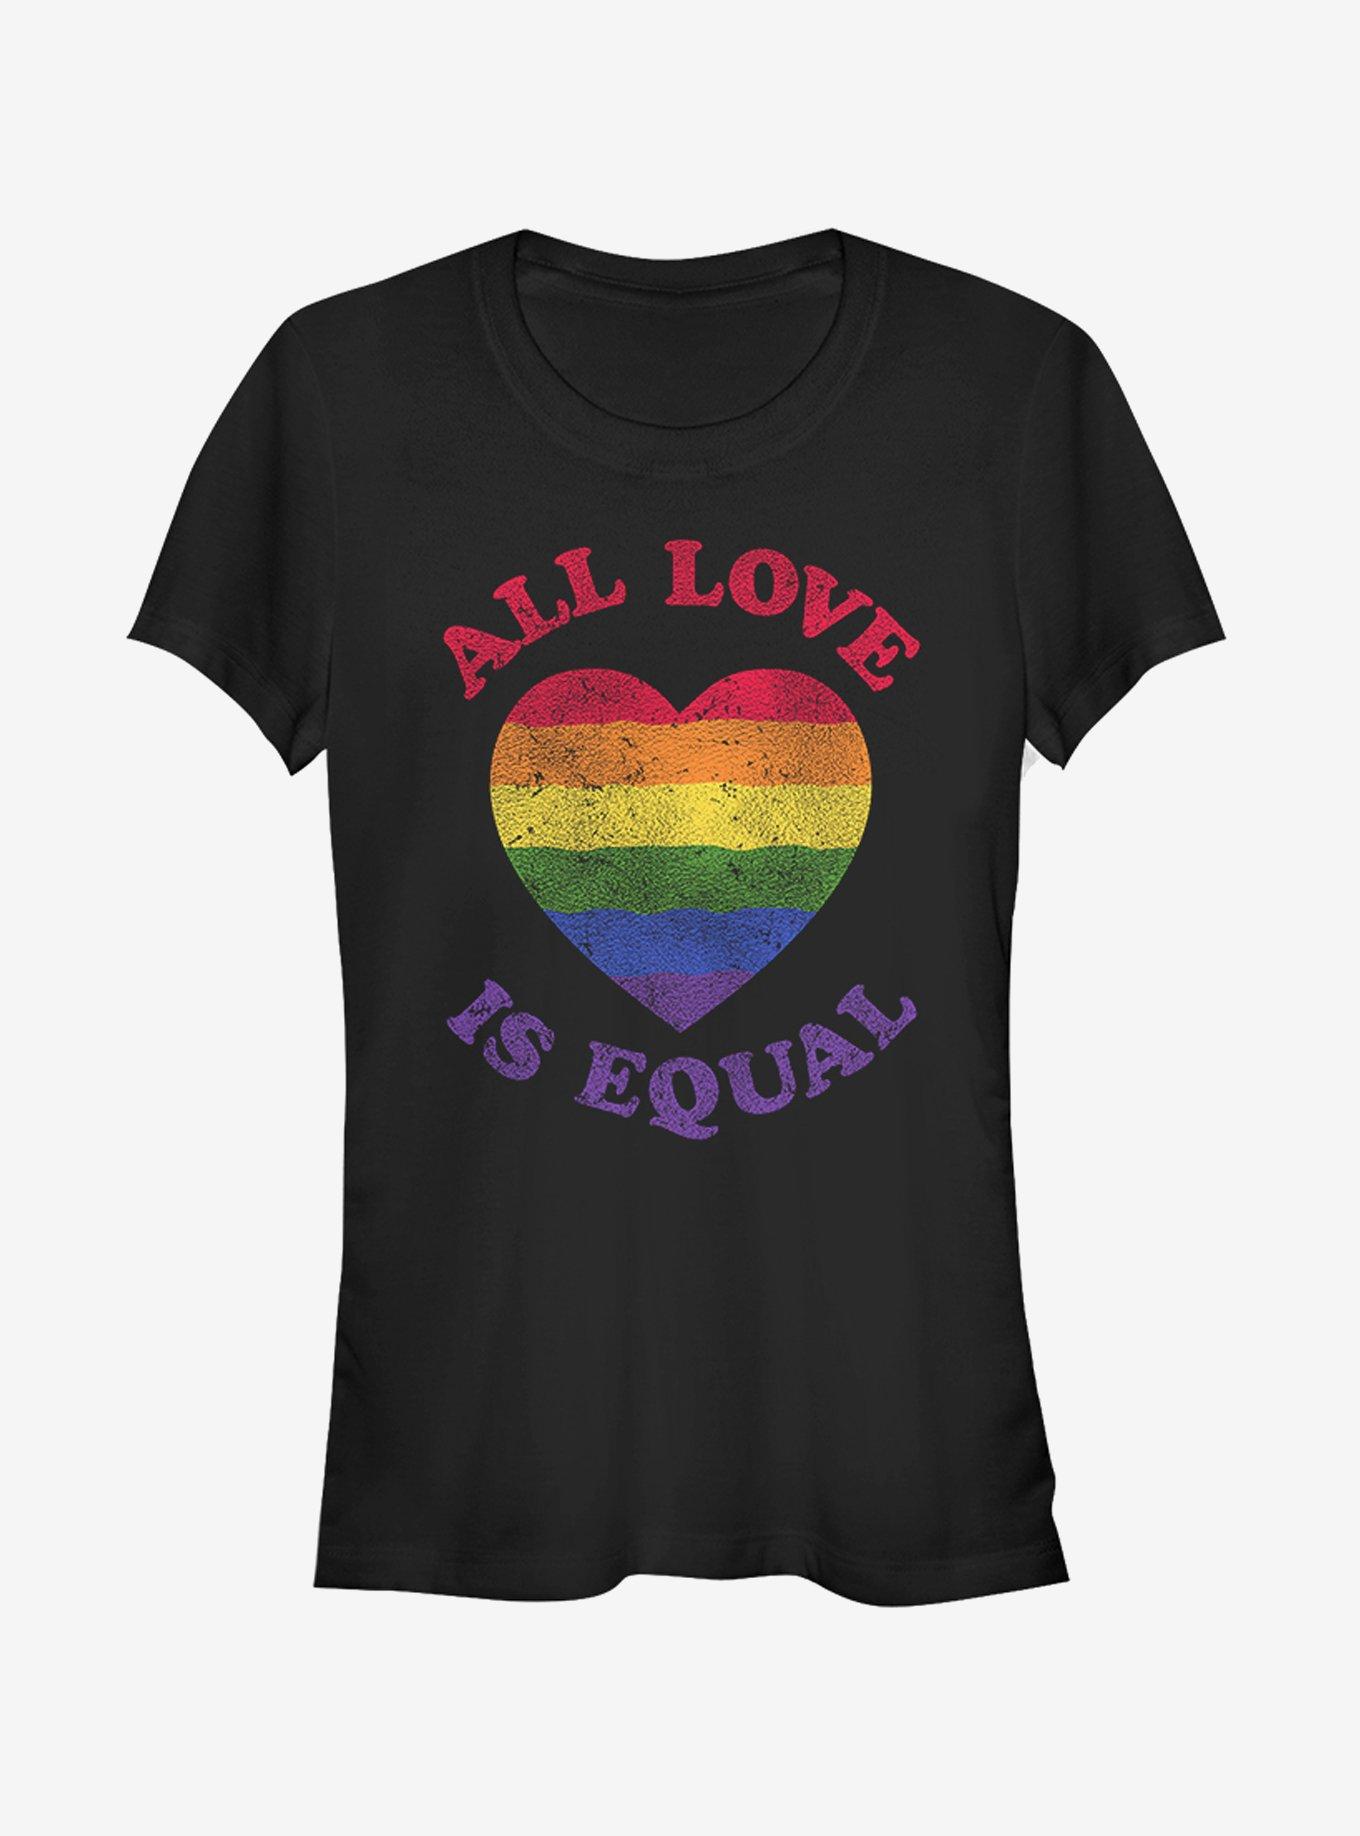 All Love Is Equal Girl's Tee, BLACK, hi-res